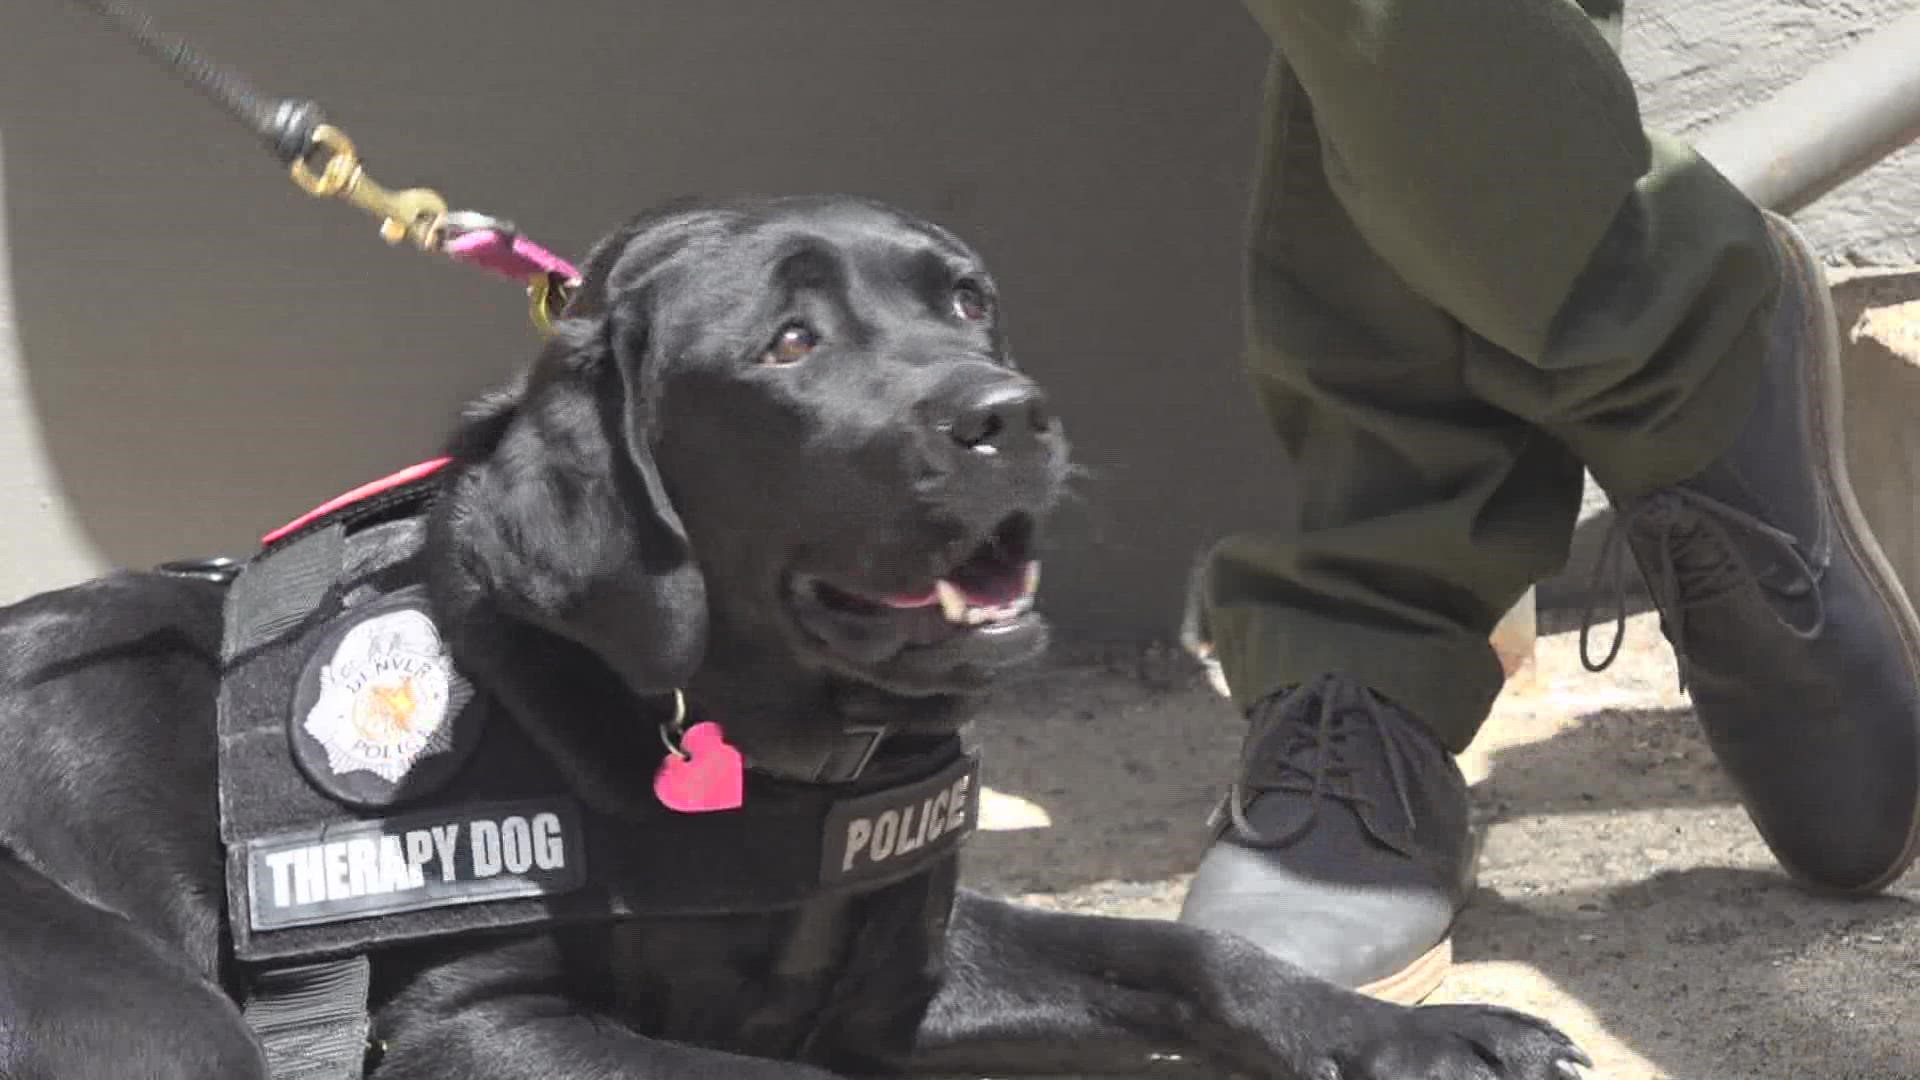 DPS stopped using sworn police officers as school resource officers this year. Police said Shelby, their therapy dog, helps bridge the gap between kids and cops.